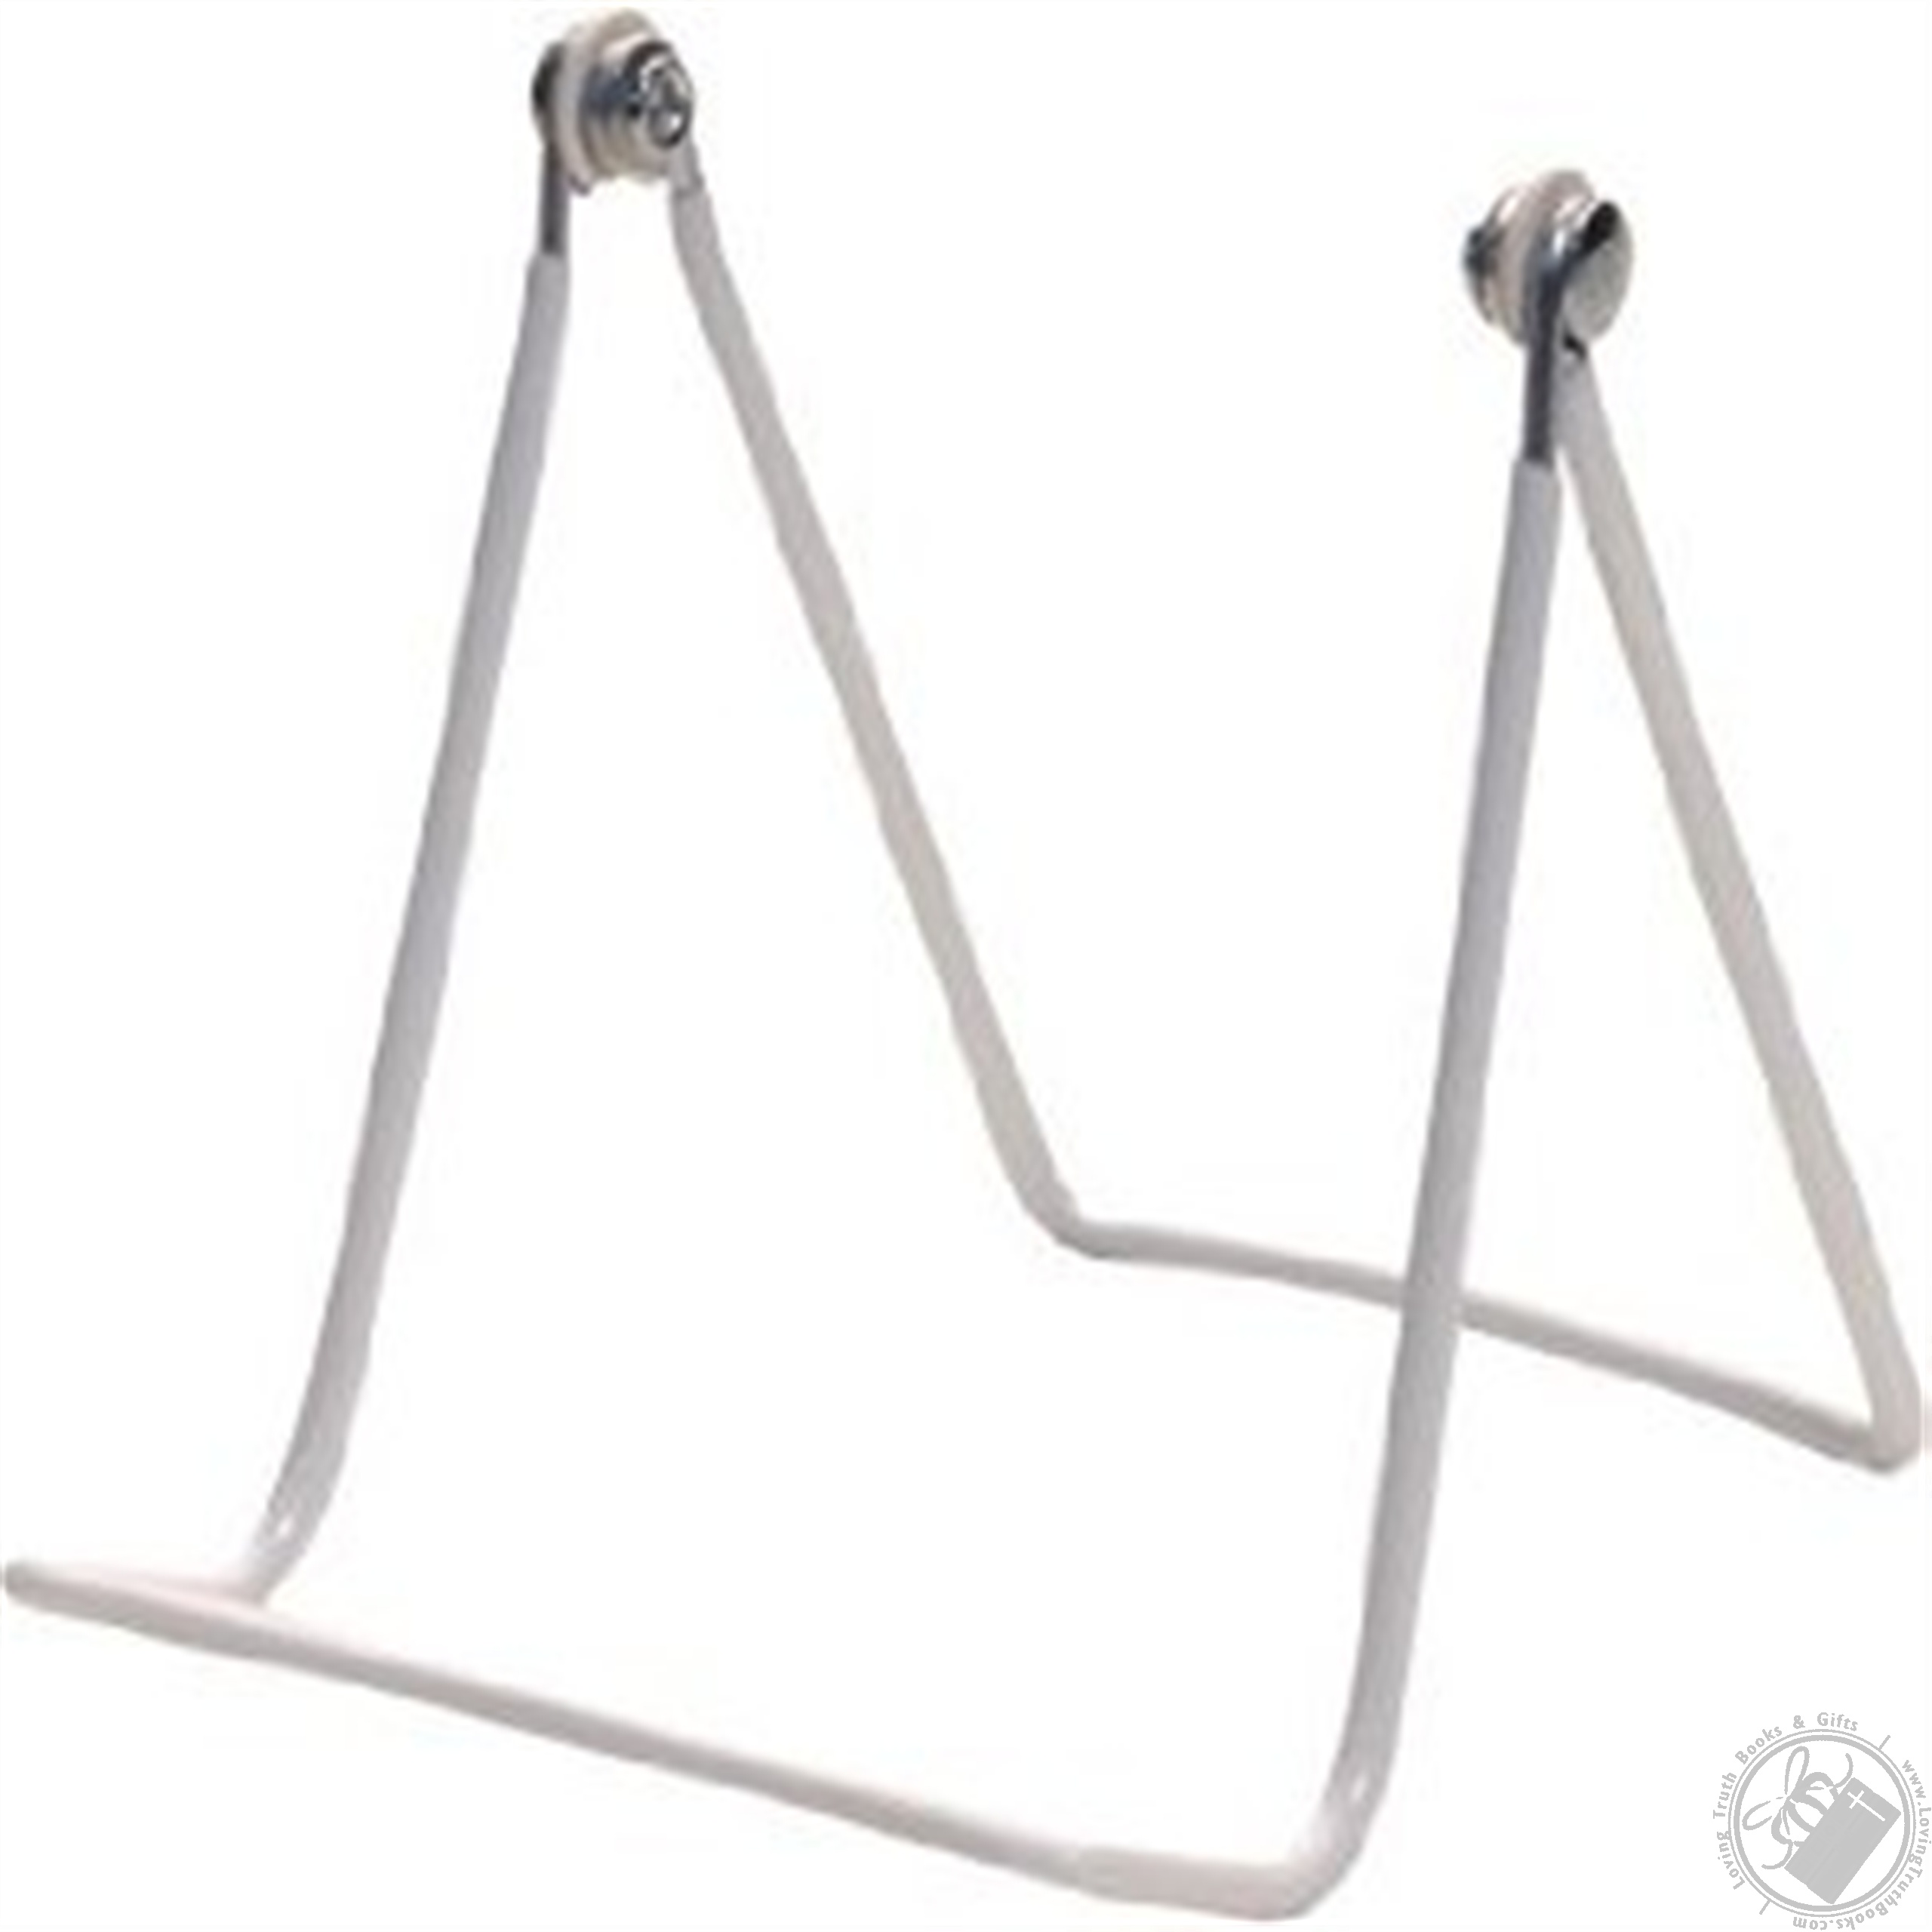 Set 2 Twowire Adjustable White Vinyl Coated Book/ Plate Display Stands/ Display Easel (33/4